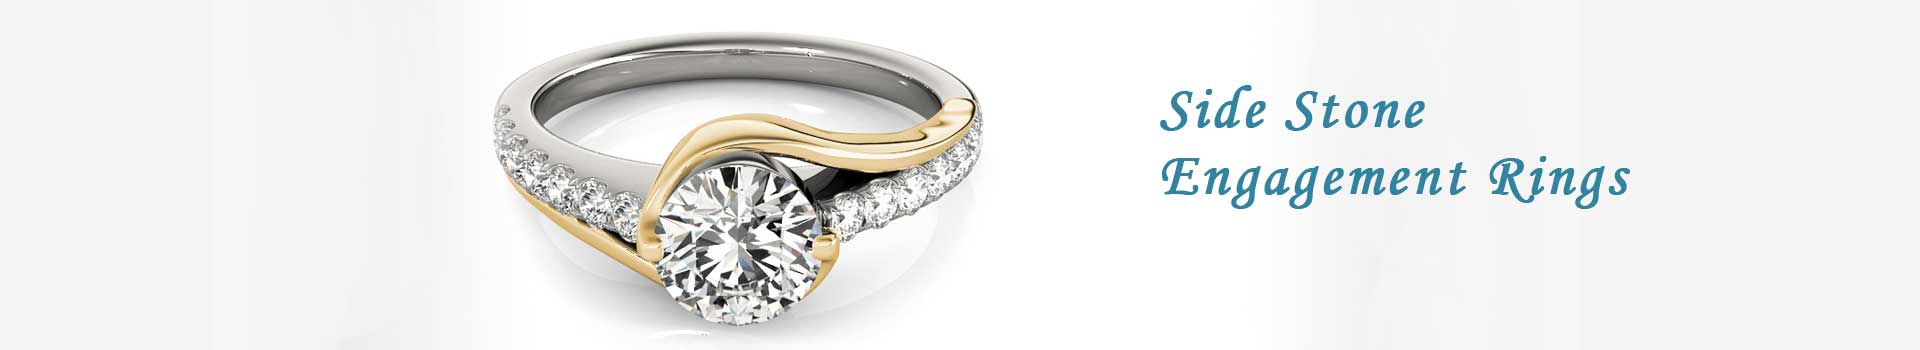 Side Stone Engagement Rings 